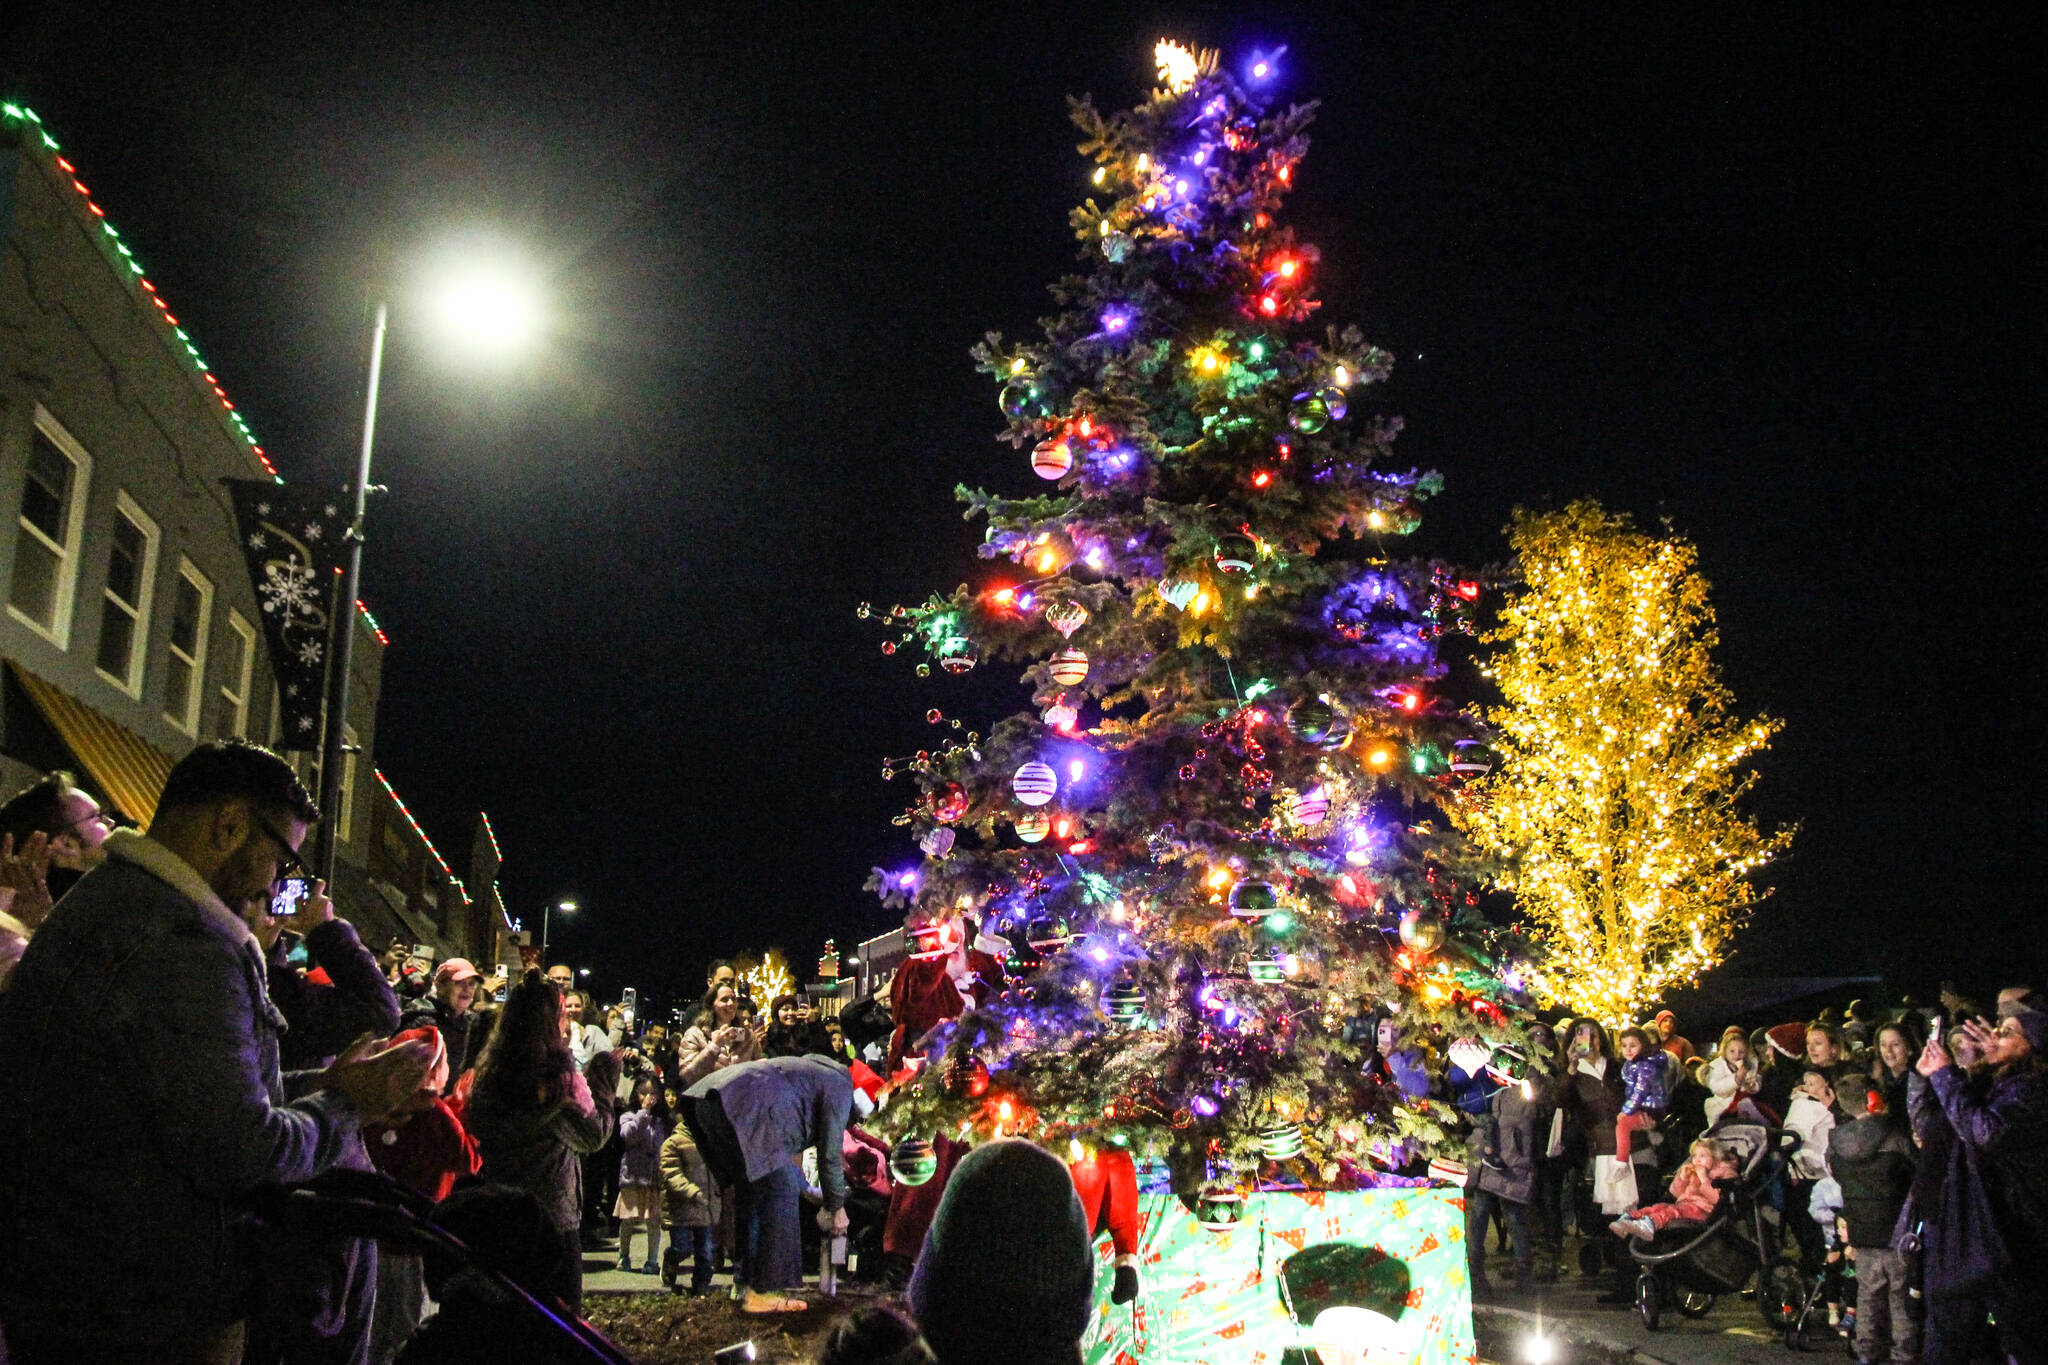 The lighting of the Christmas tree in Downtown Oak Harbor. (Photo by Luisa Loi)